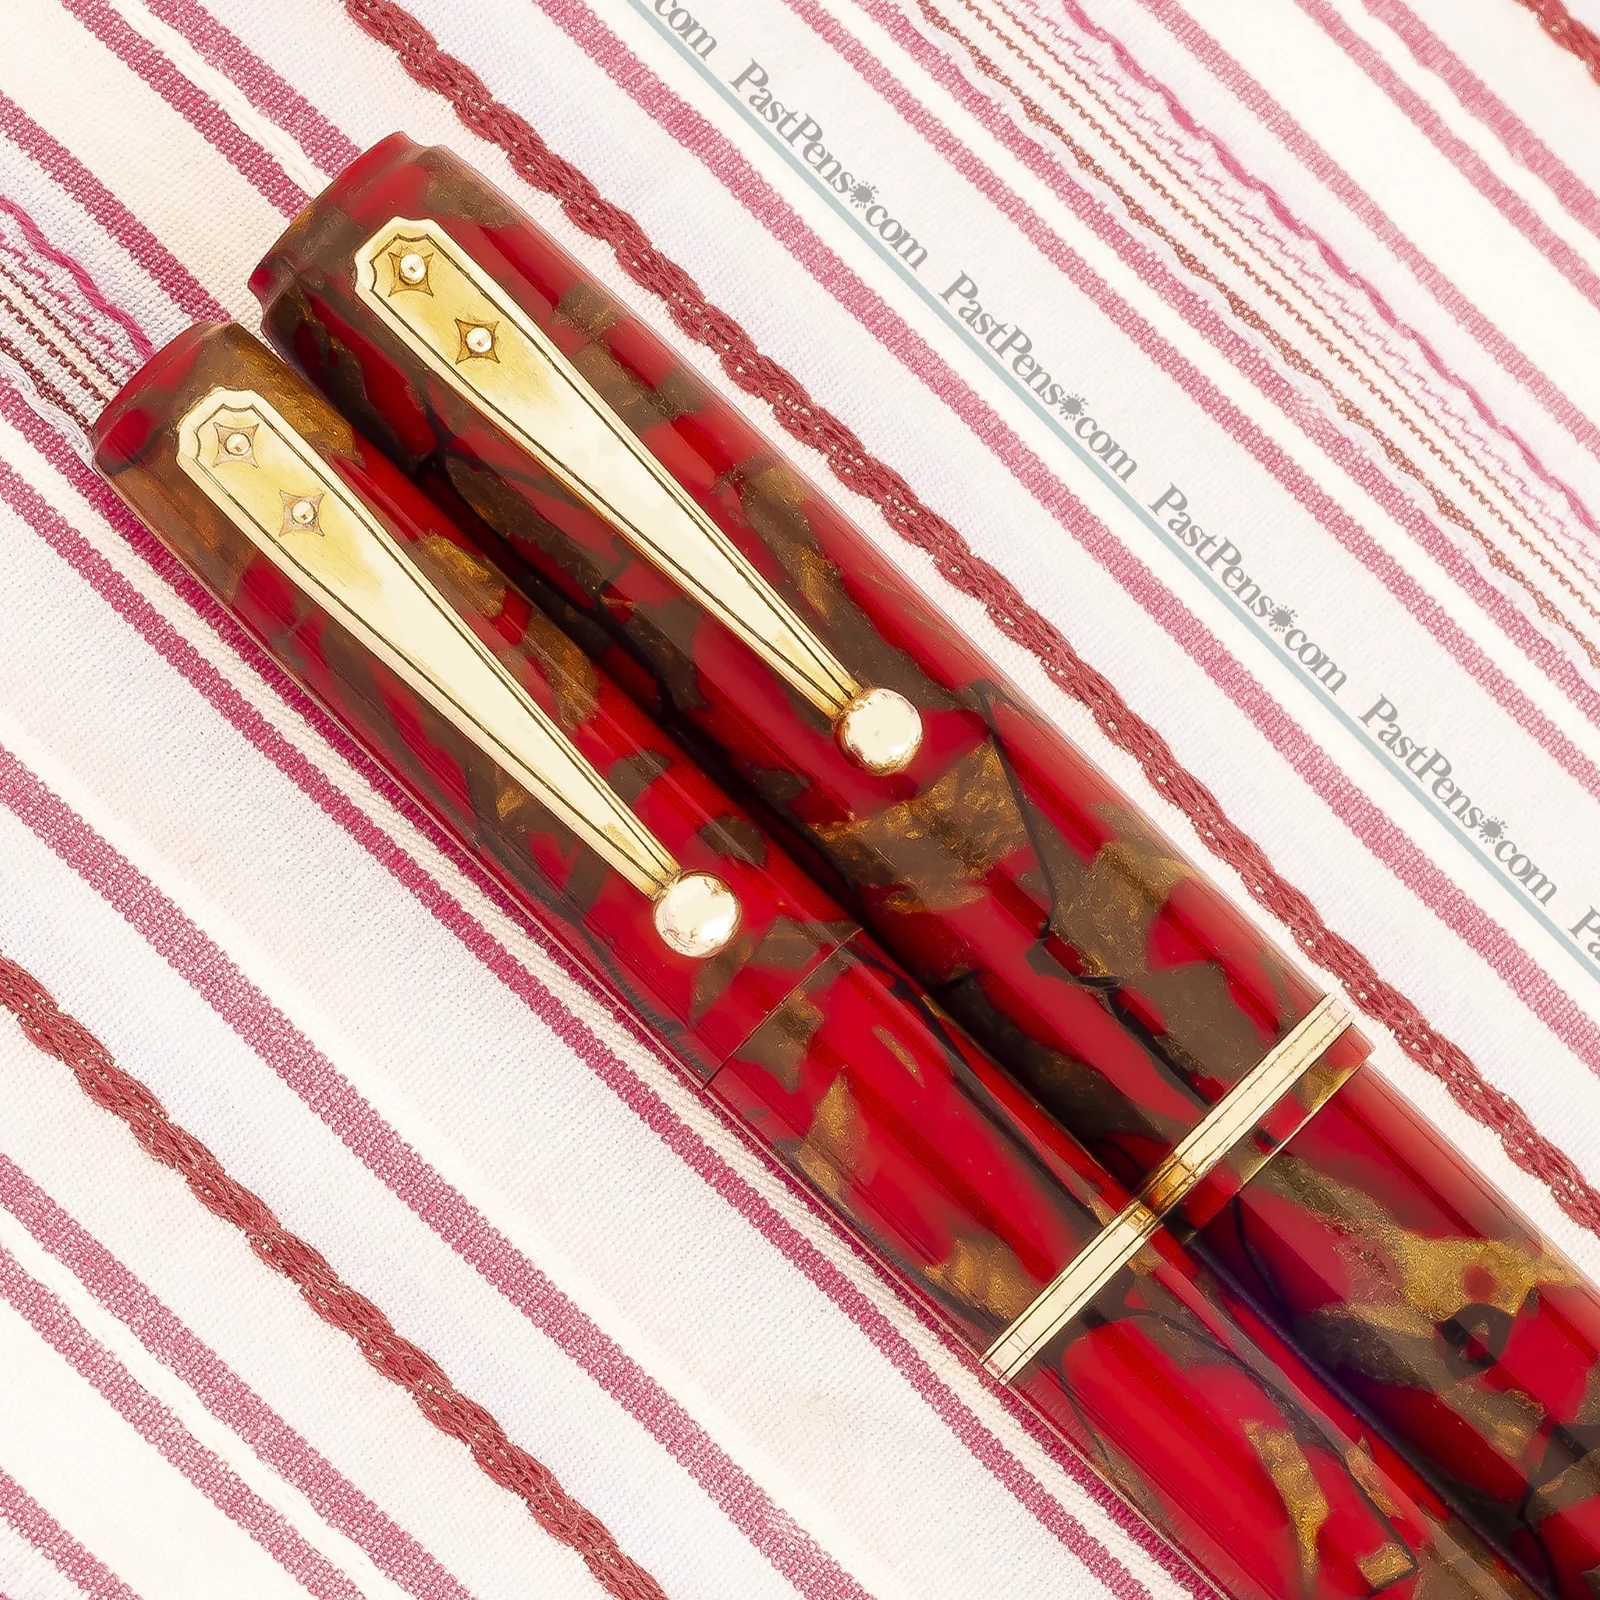 waterman ideal 92 wine red gold marble fountain pen pencil set wm141 1 1